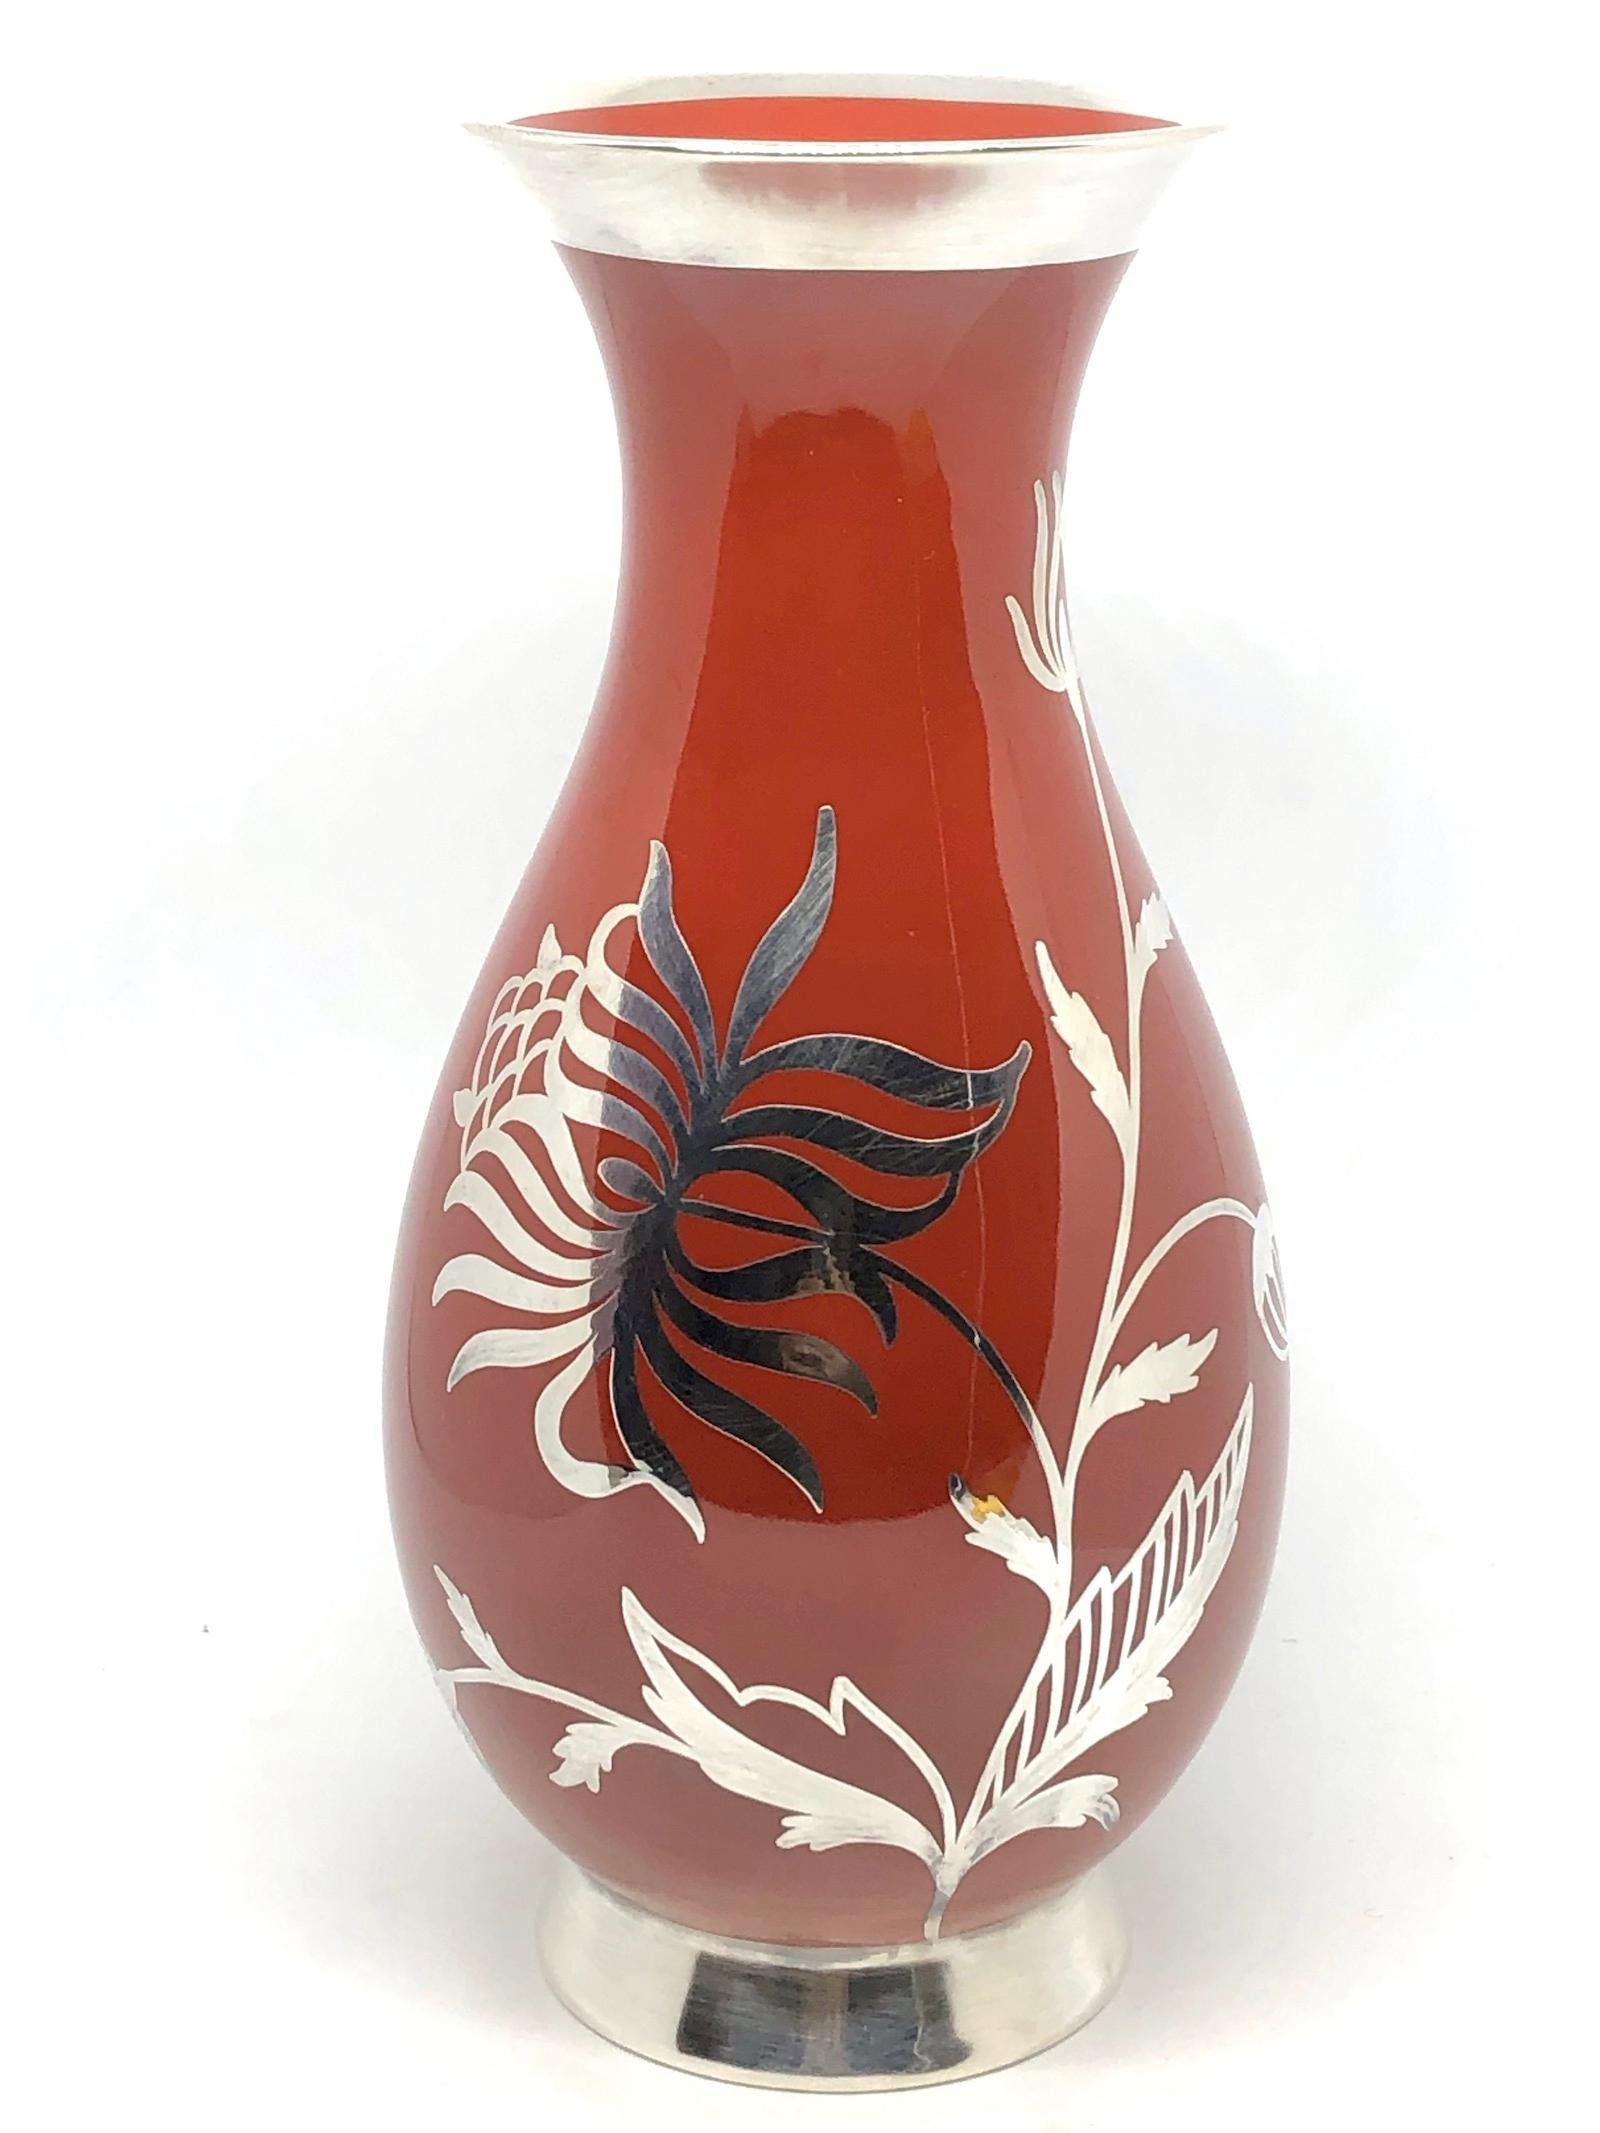 An amazing china porcelain studio art pottery vase made in Germany, by Furstenberg, circa 1930s or older. Vase is in very good condition with no chips, cracks, or flea bites. Signed like seen in the picture.